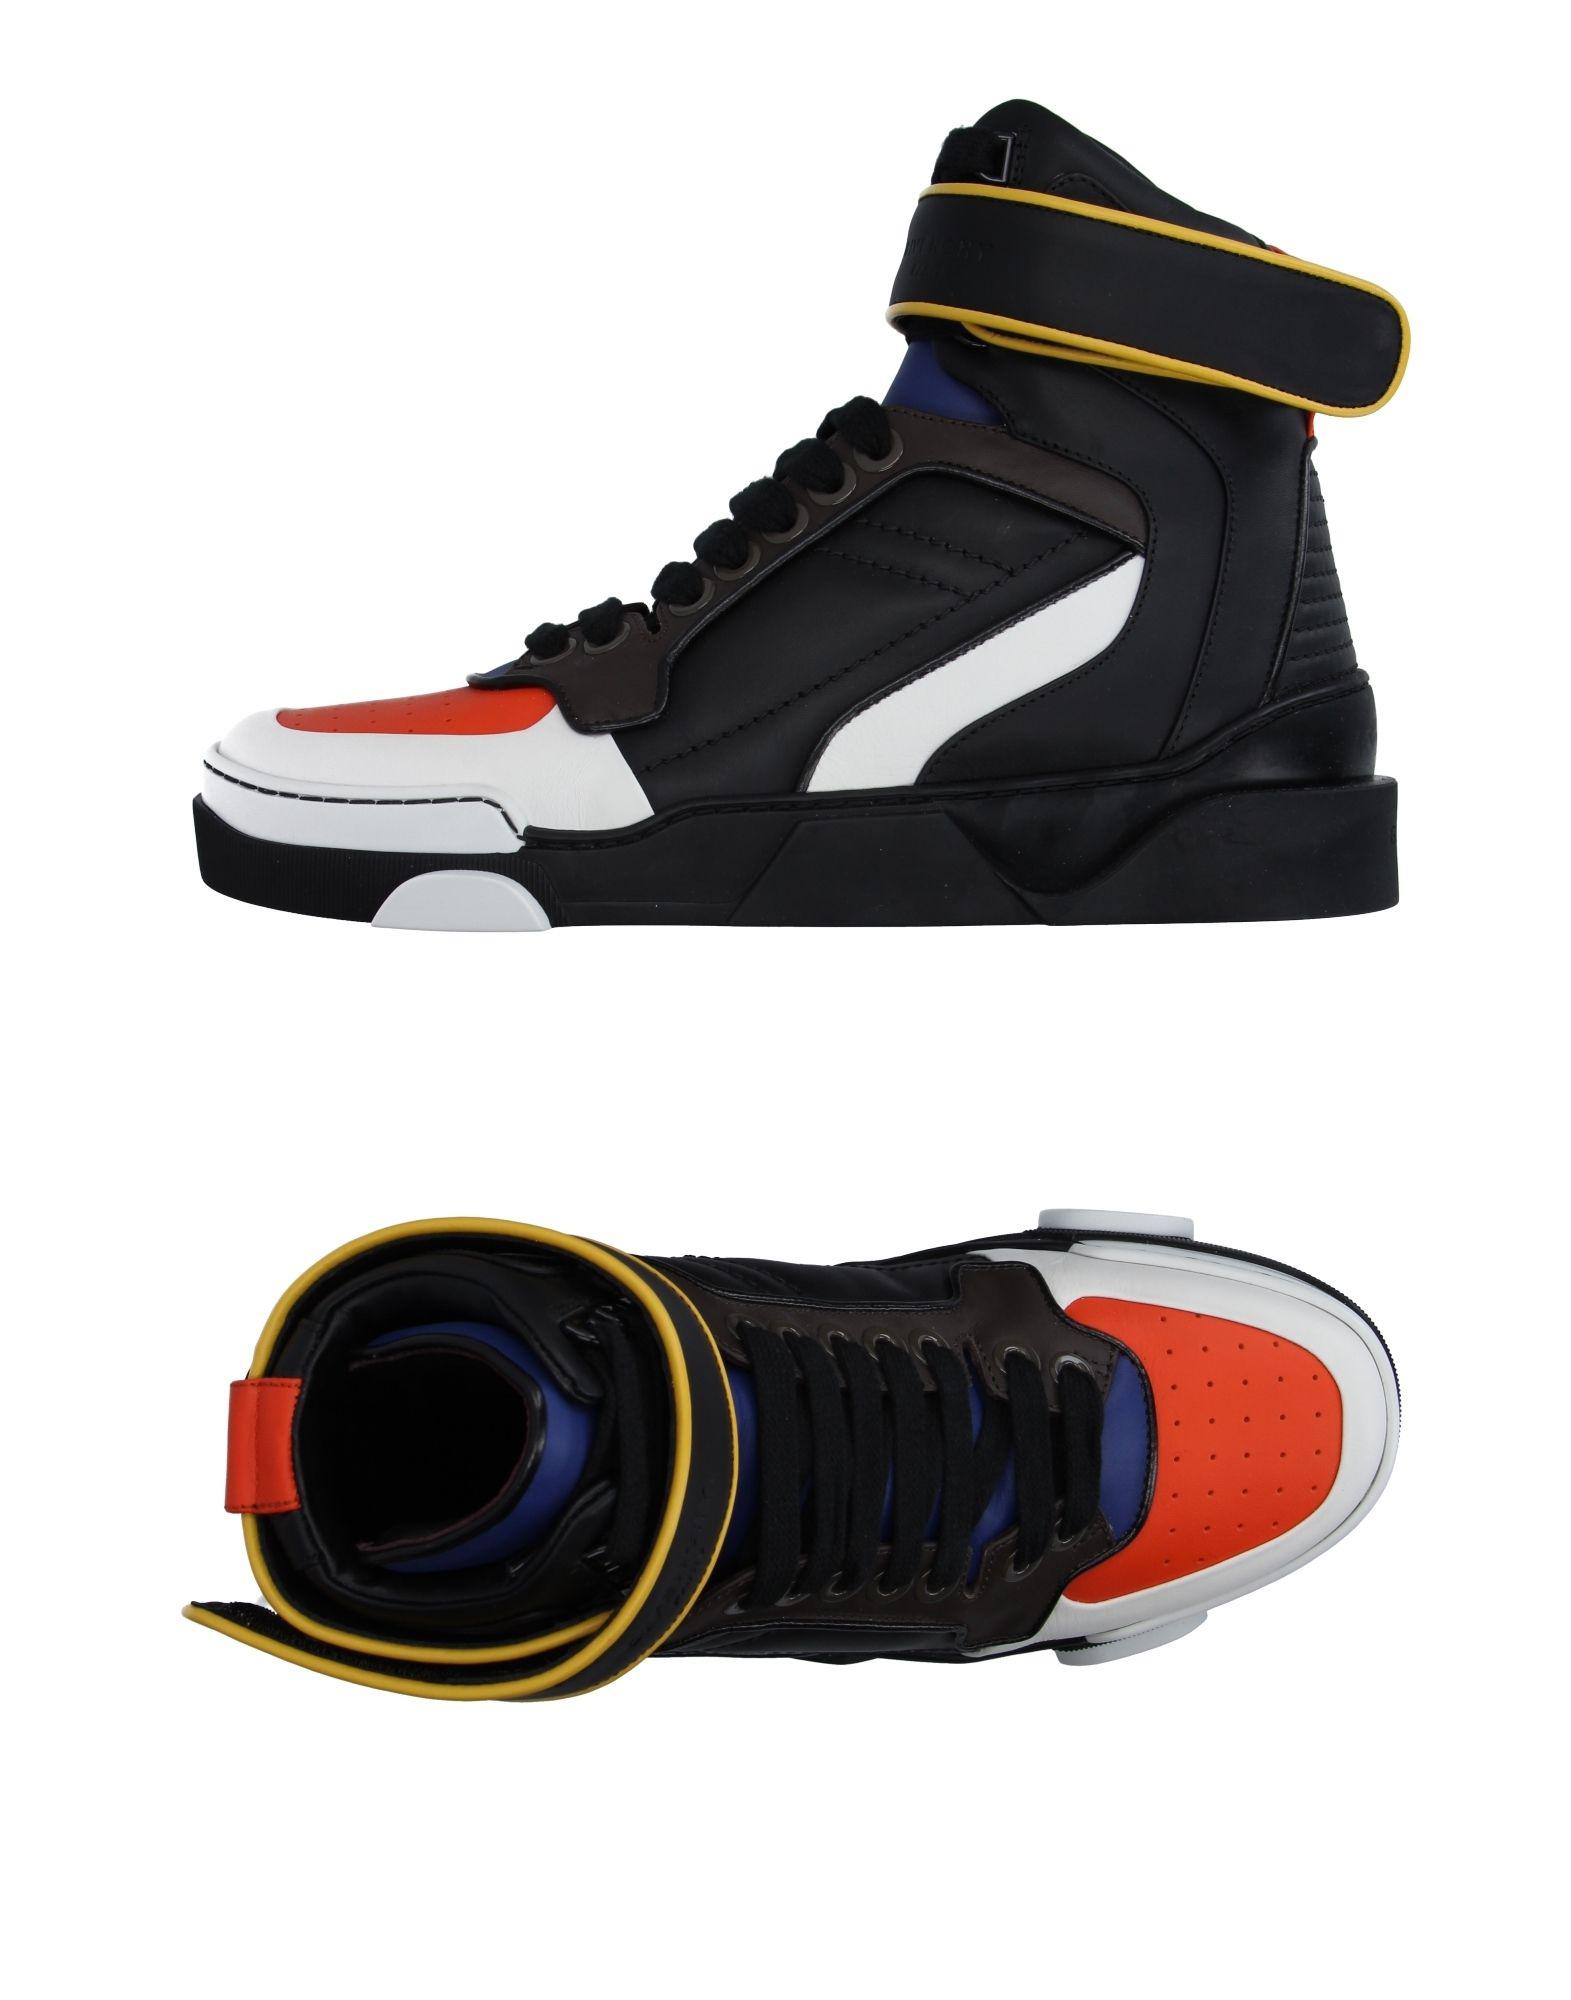 Lyst - Givenchy Leather High-top Sneakers in Black for Men